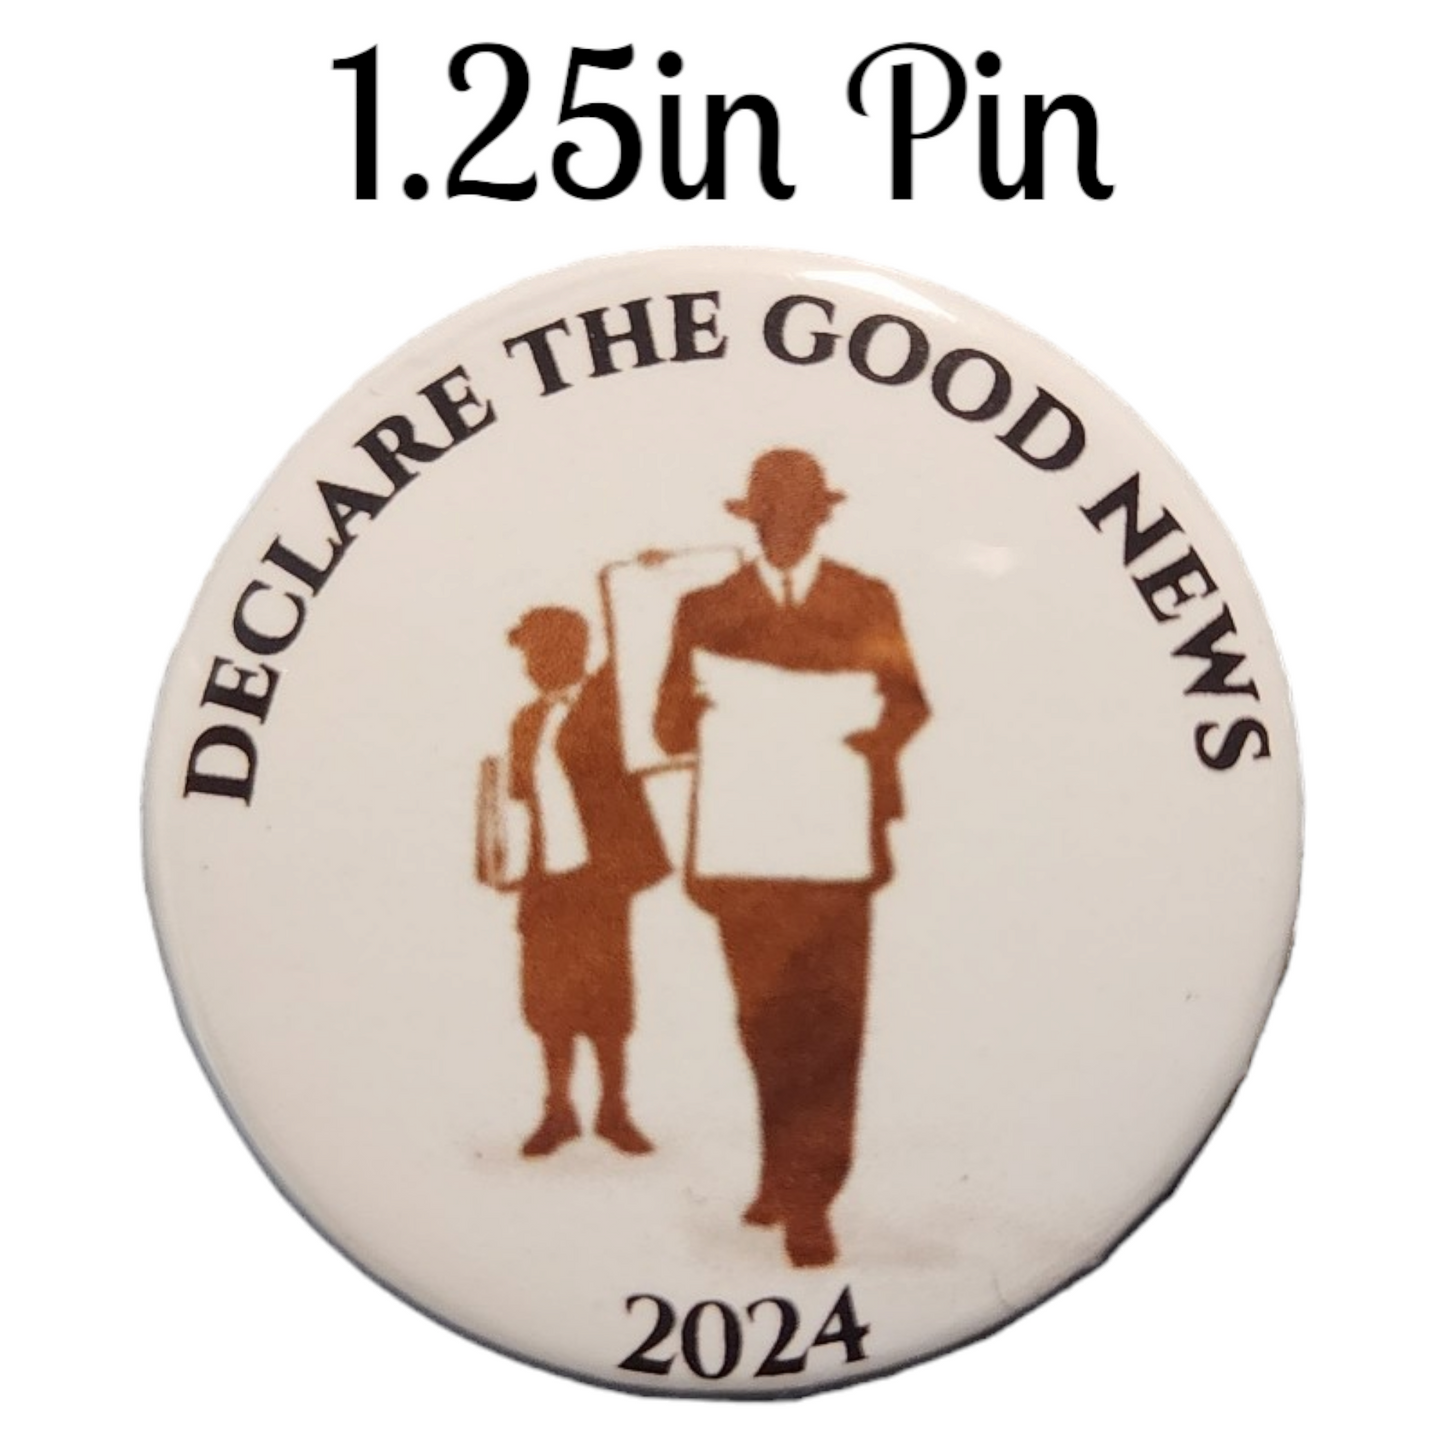 JW - 1.25" Button Pin - 2024 Convention - Declare the Good News - Plaque